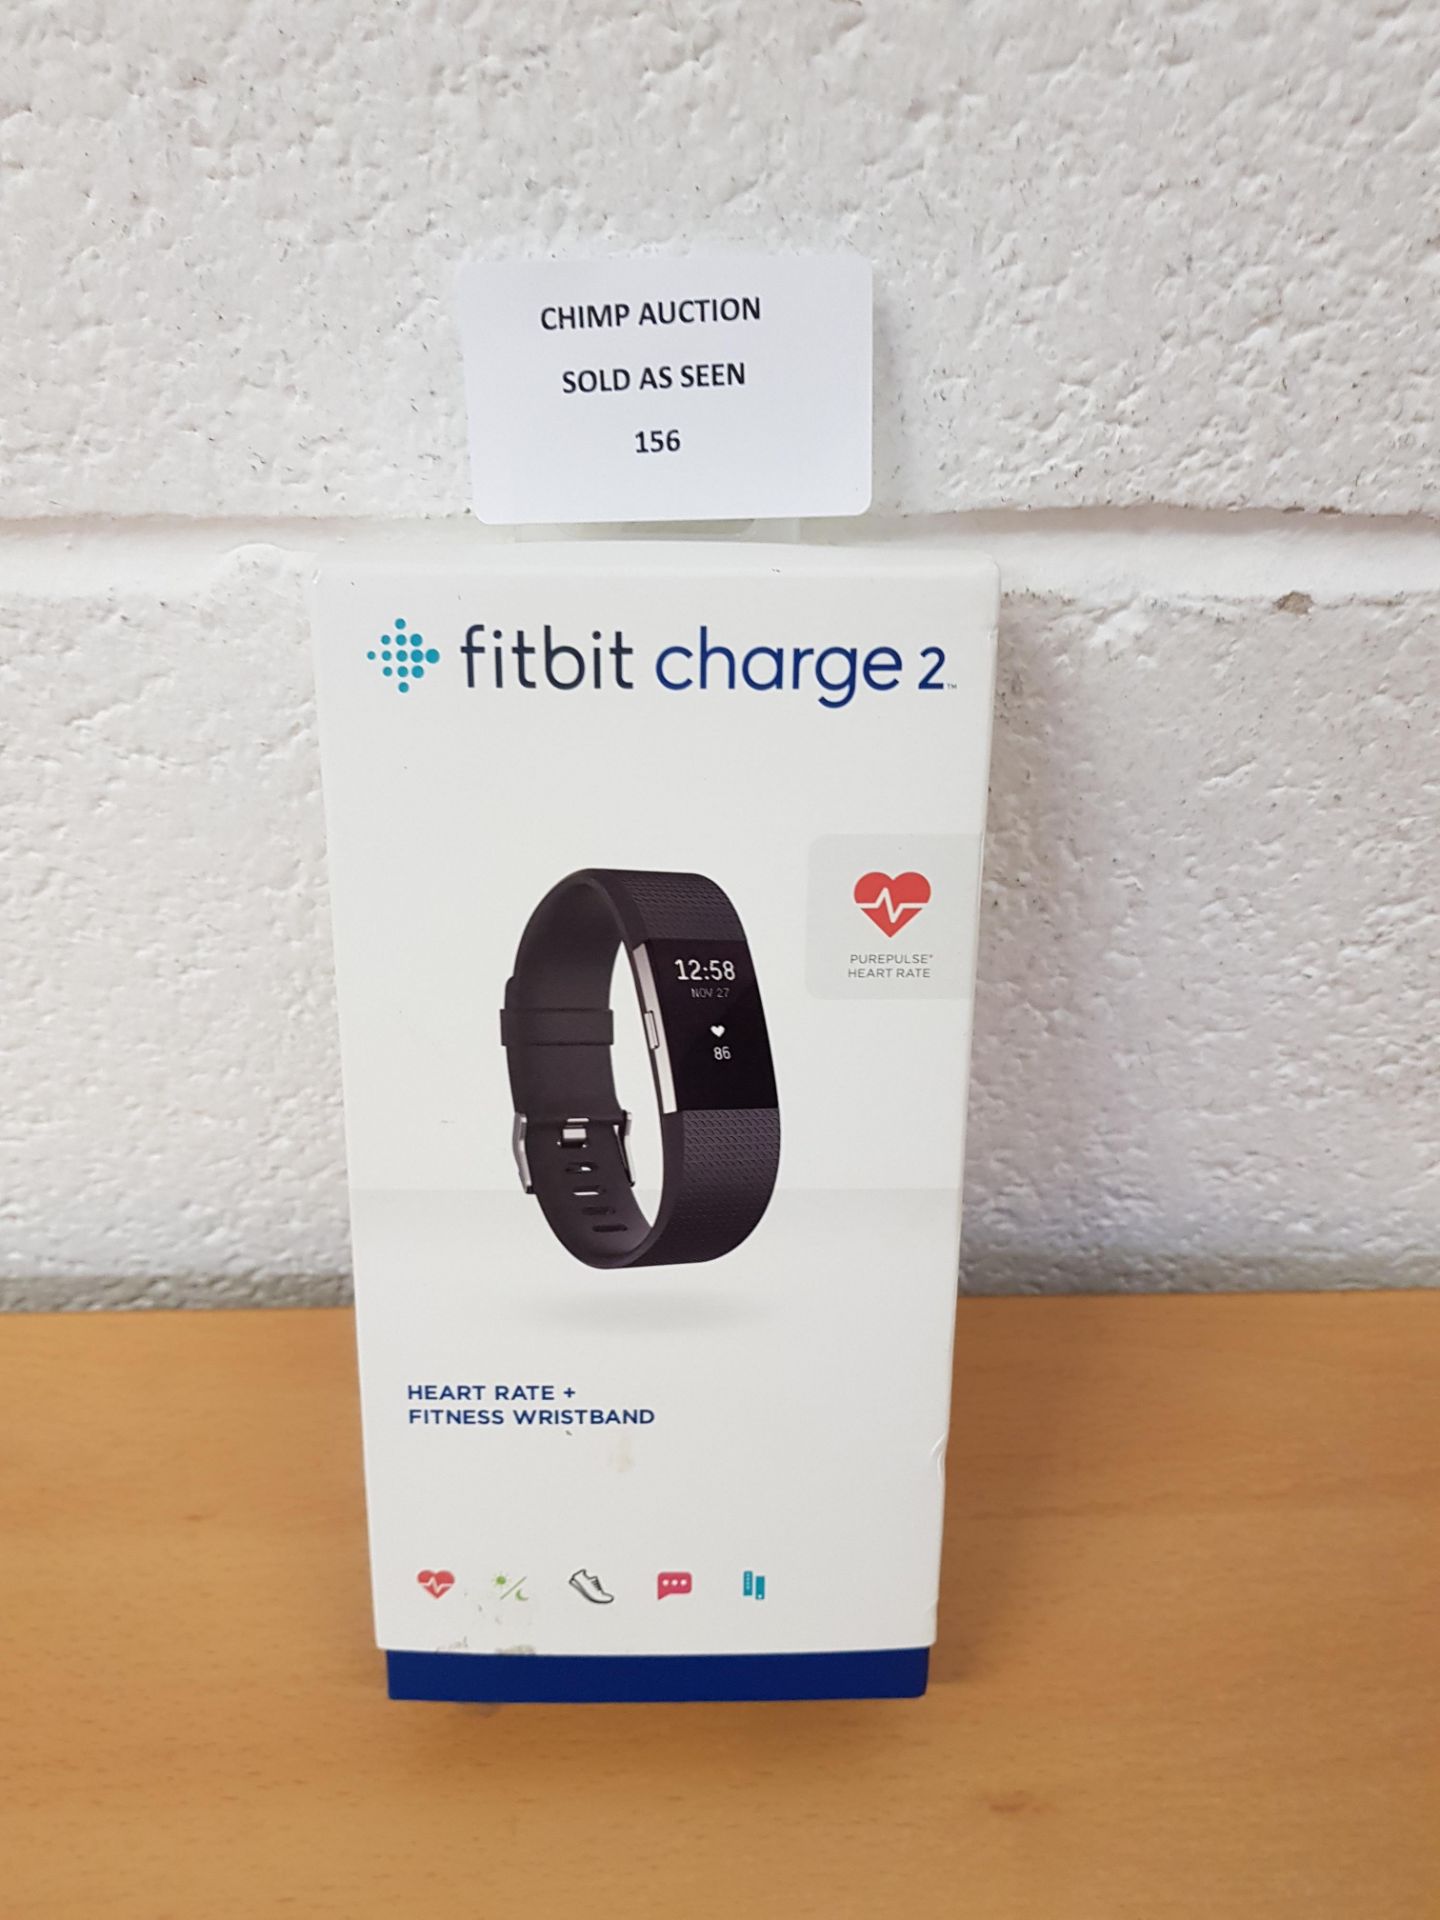 Fitbit Charge 2 Smart Fitness Watch RRP £169.99.